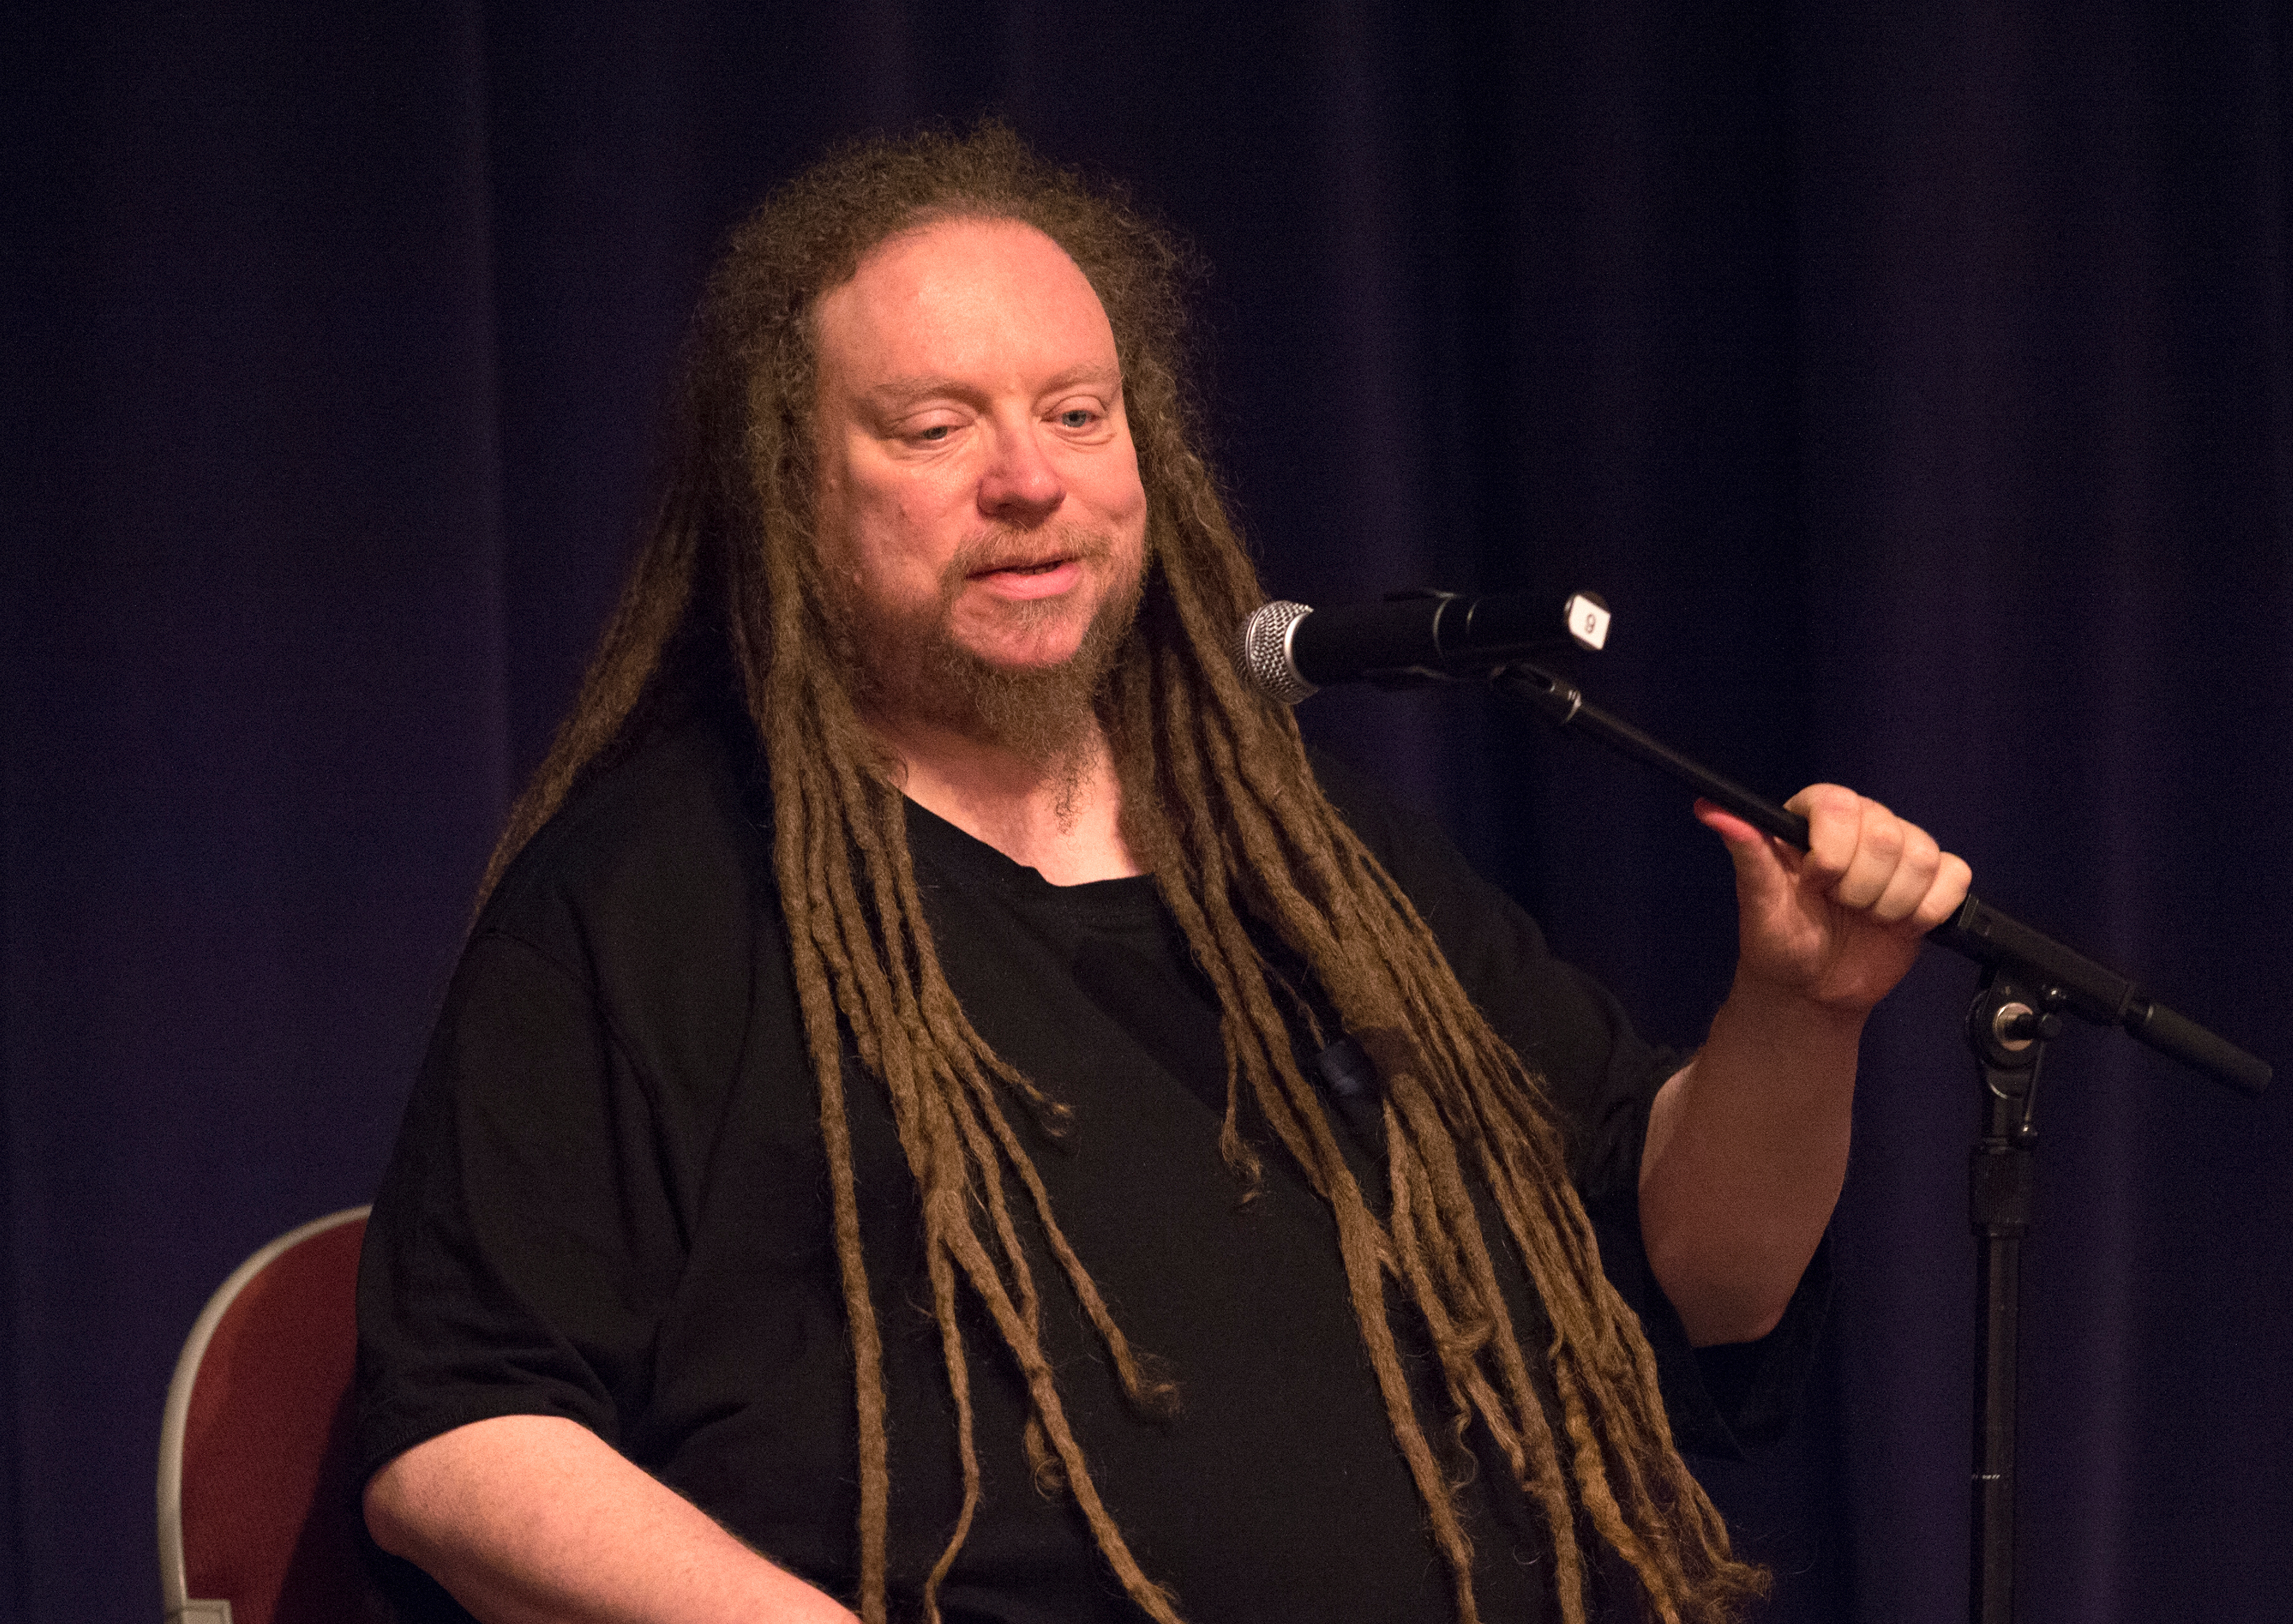 Jaron Lanier, Scientist, Author, Musician, Artist and Virtual Reality Pioneer, "The concept of AI harms the technologies created under its banner"